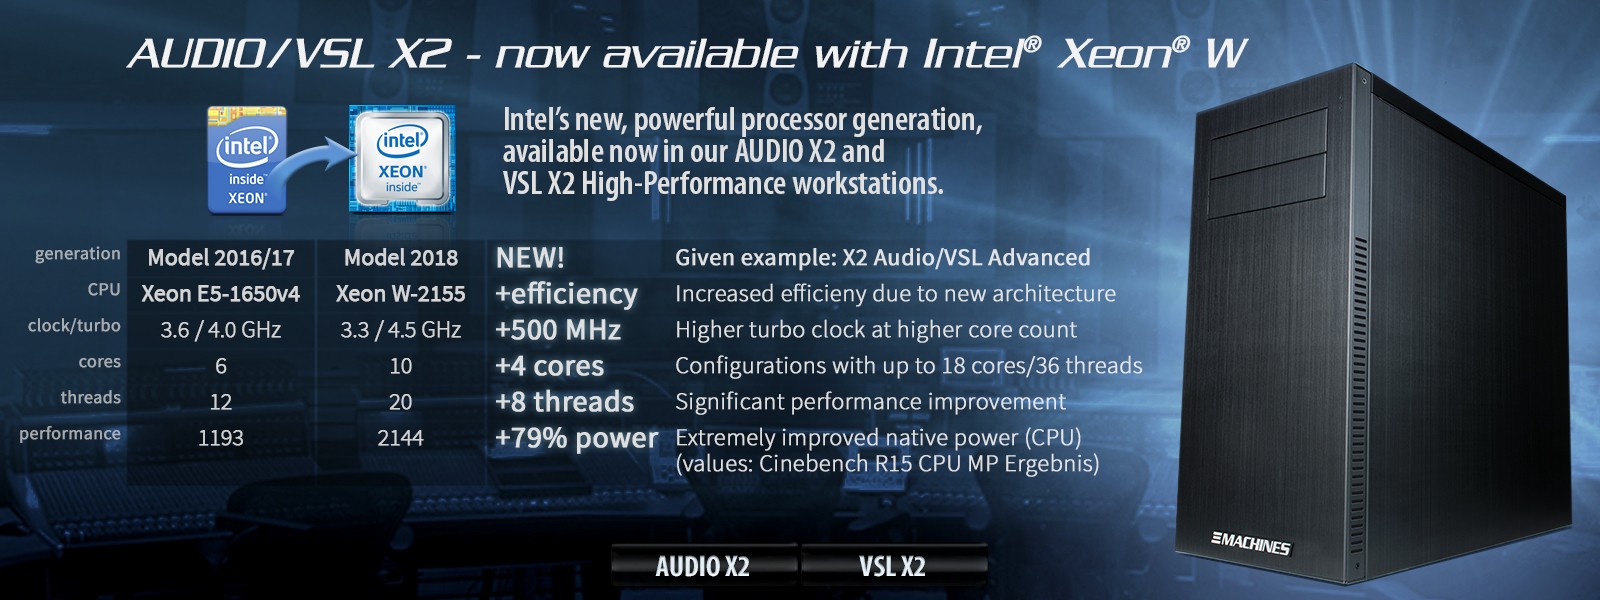 AUDIO X2 WORKSTATIONS with Intel´s newest CPU generation Xeon W